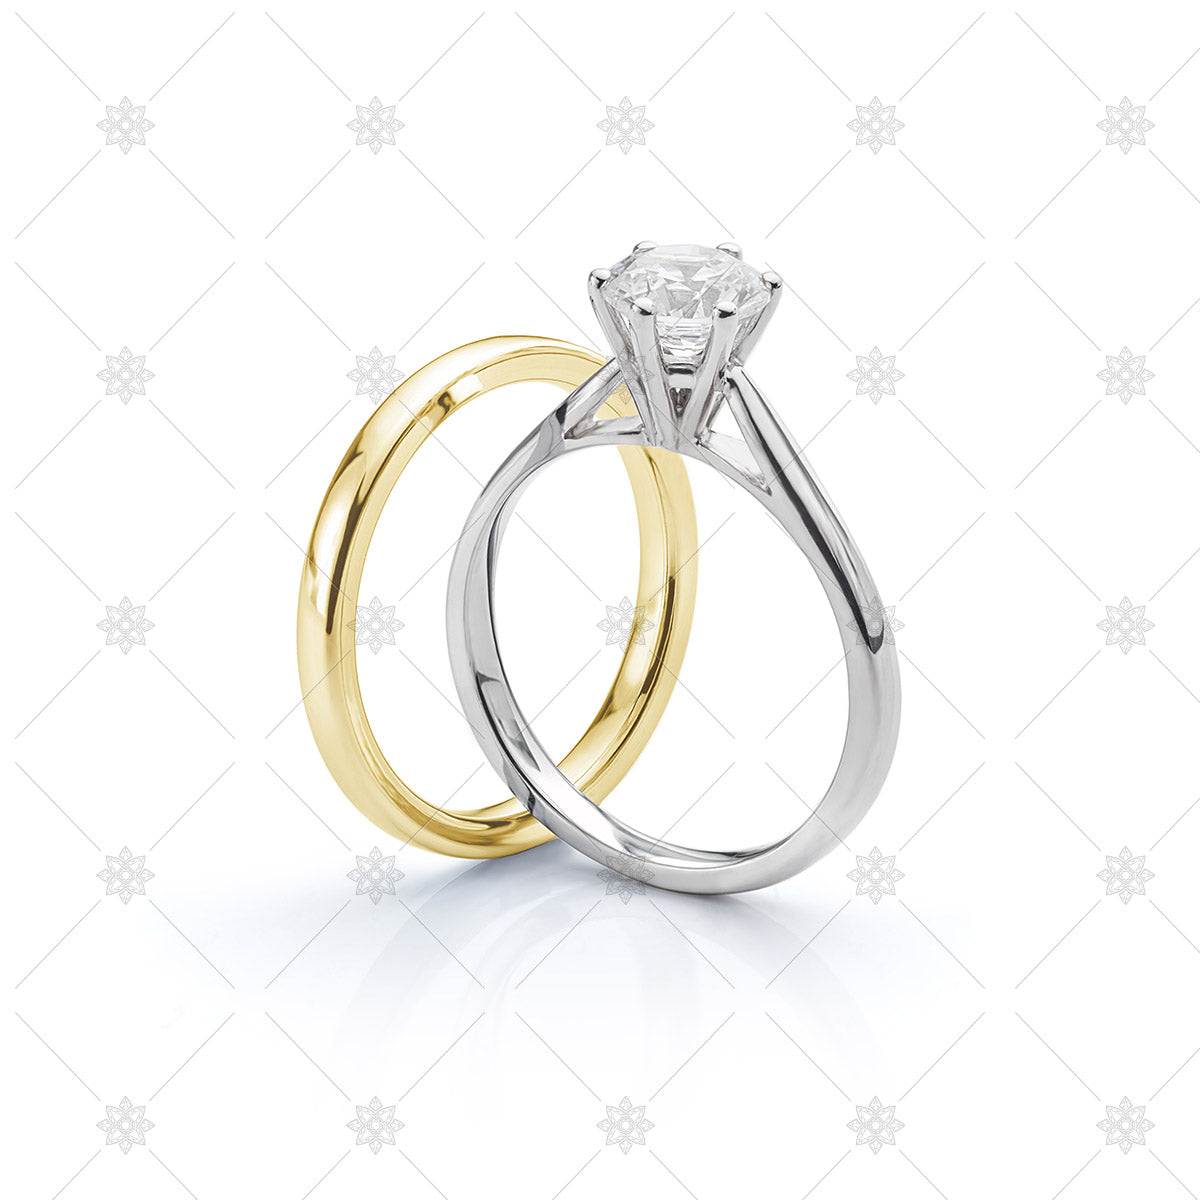 Couple Rings Set Womens Gold IP Stainless Steel 5mm Round CZ Wedding Ring  Mens Gold Flat Band- Size W6M11 - Walmart.com